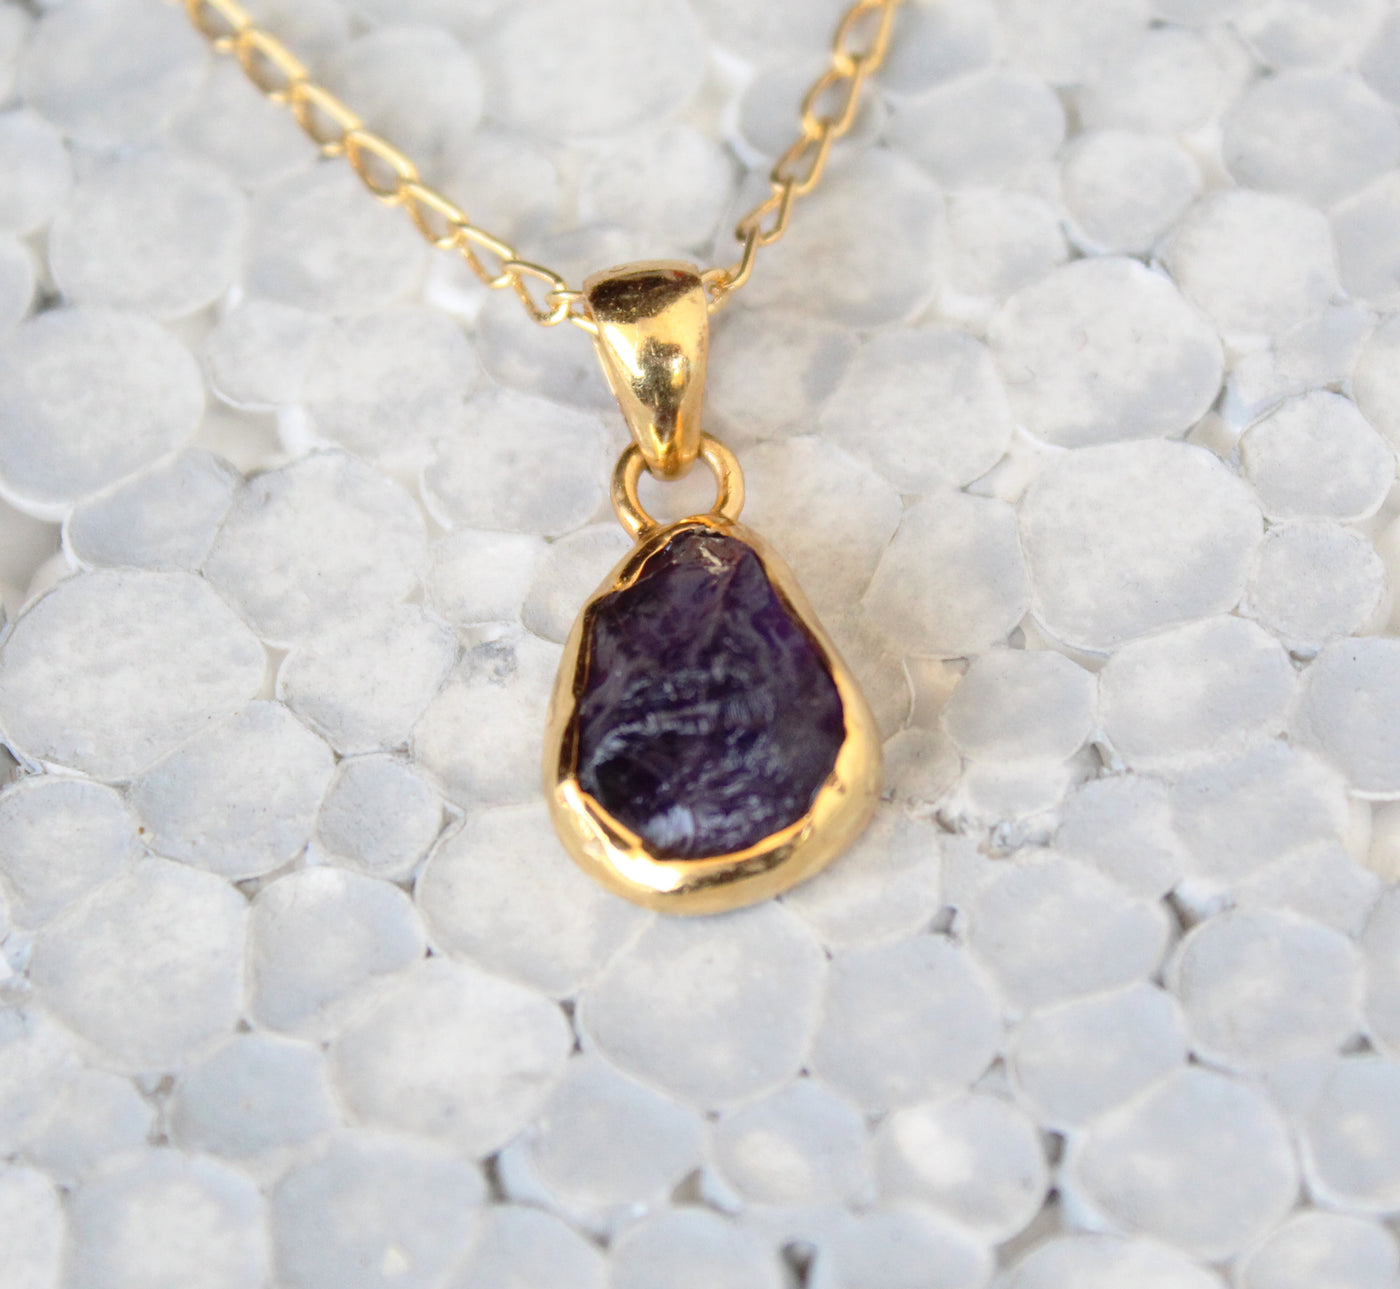 Raw Amethyst Necklace, Crystal Necklace, Bridesmaid Necklace, Gold Filled Raw Necklace, Sterling Silver Necklace, Purple Stone Necklace